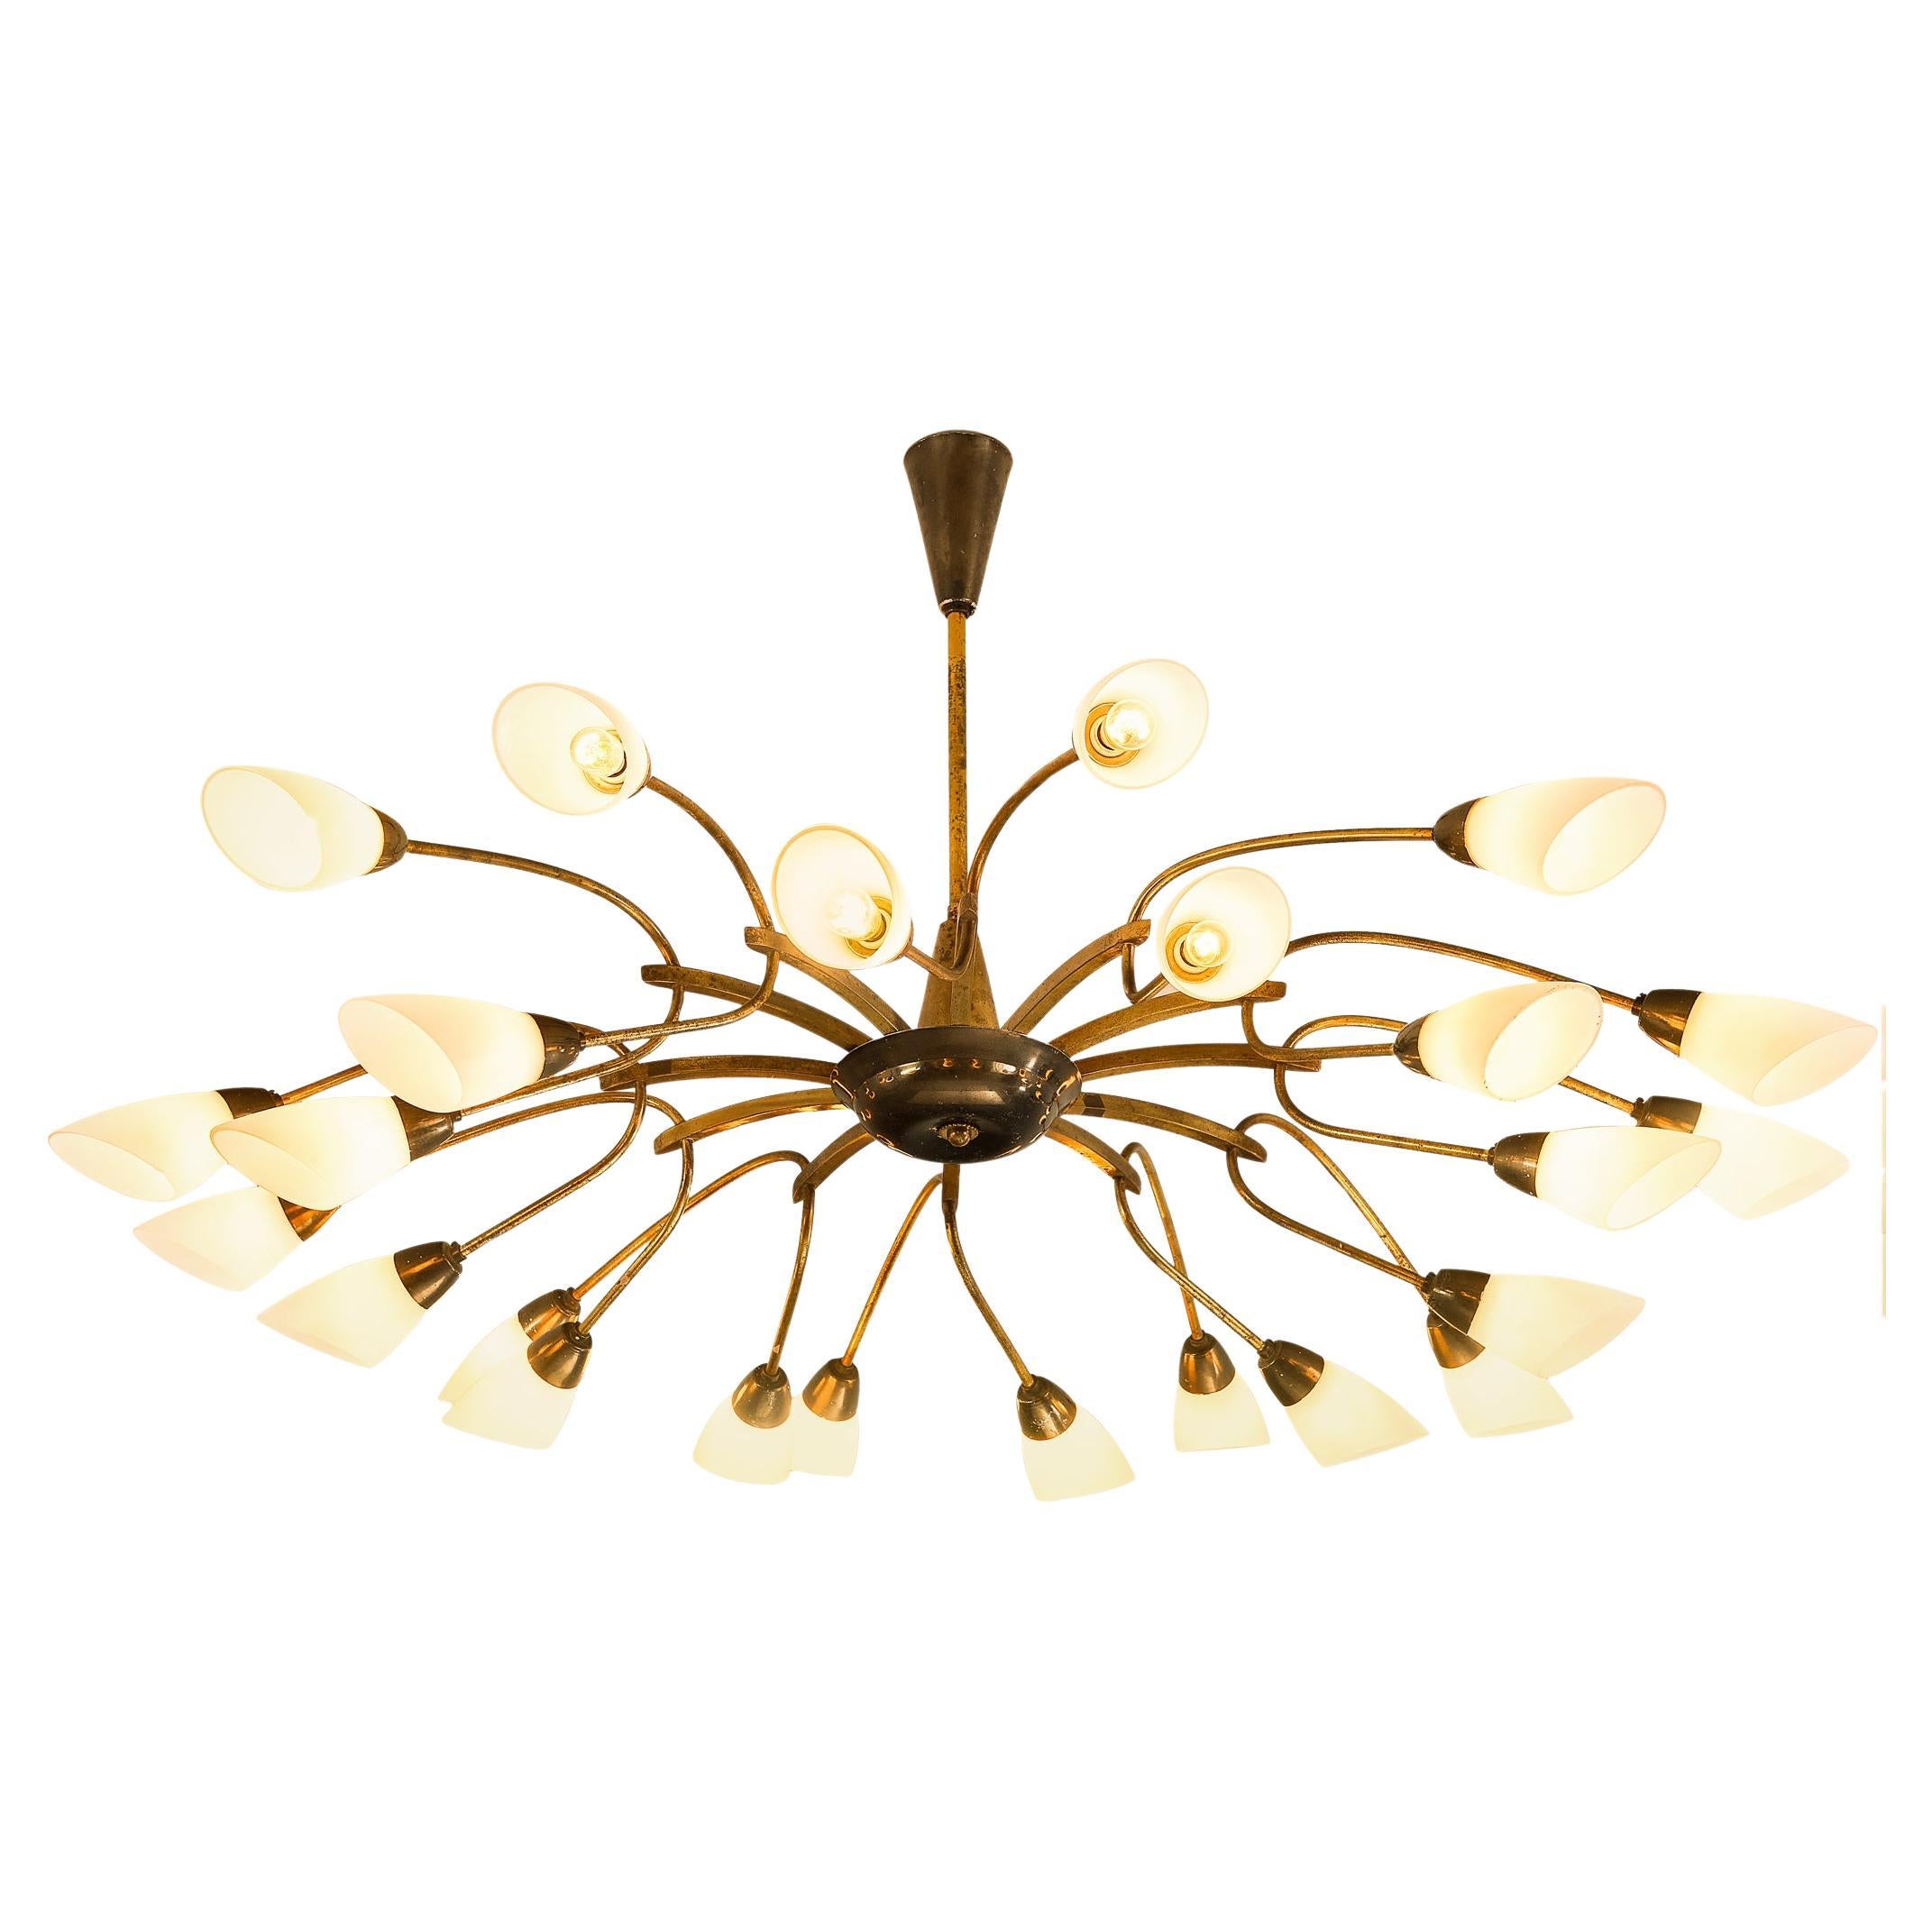 Italian Chandelier in Brass and White Opaque Glass 110cm/43.31in 